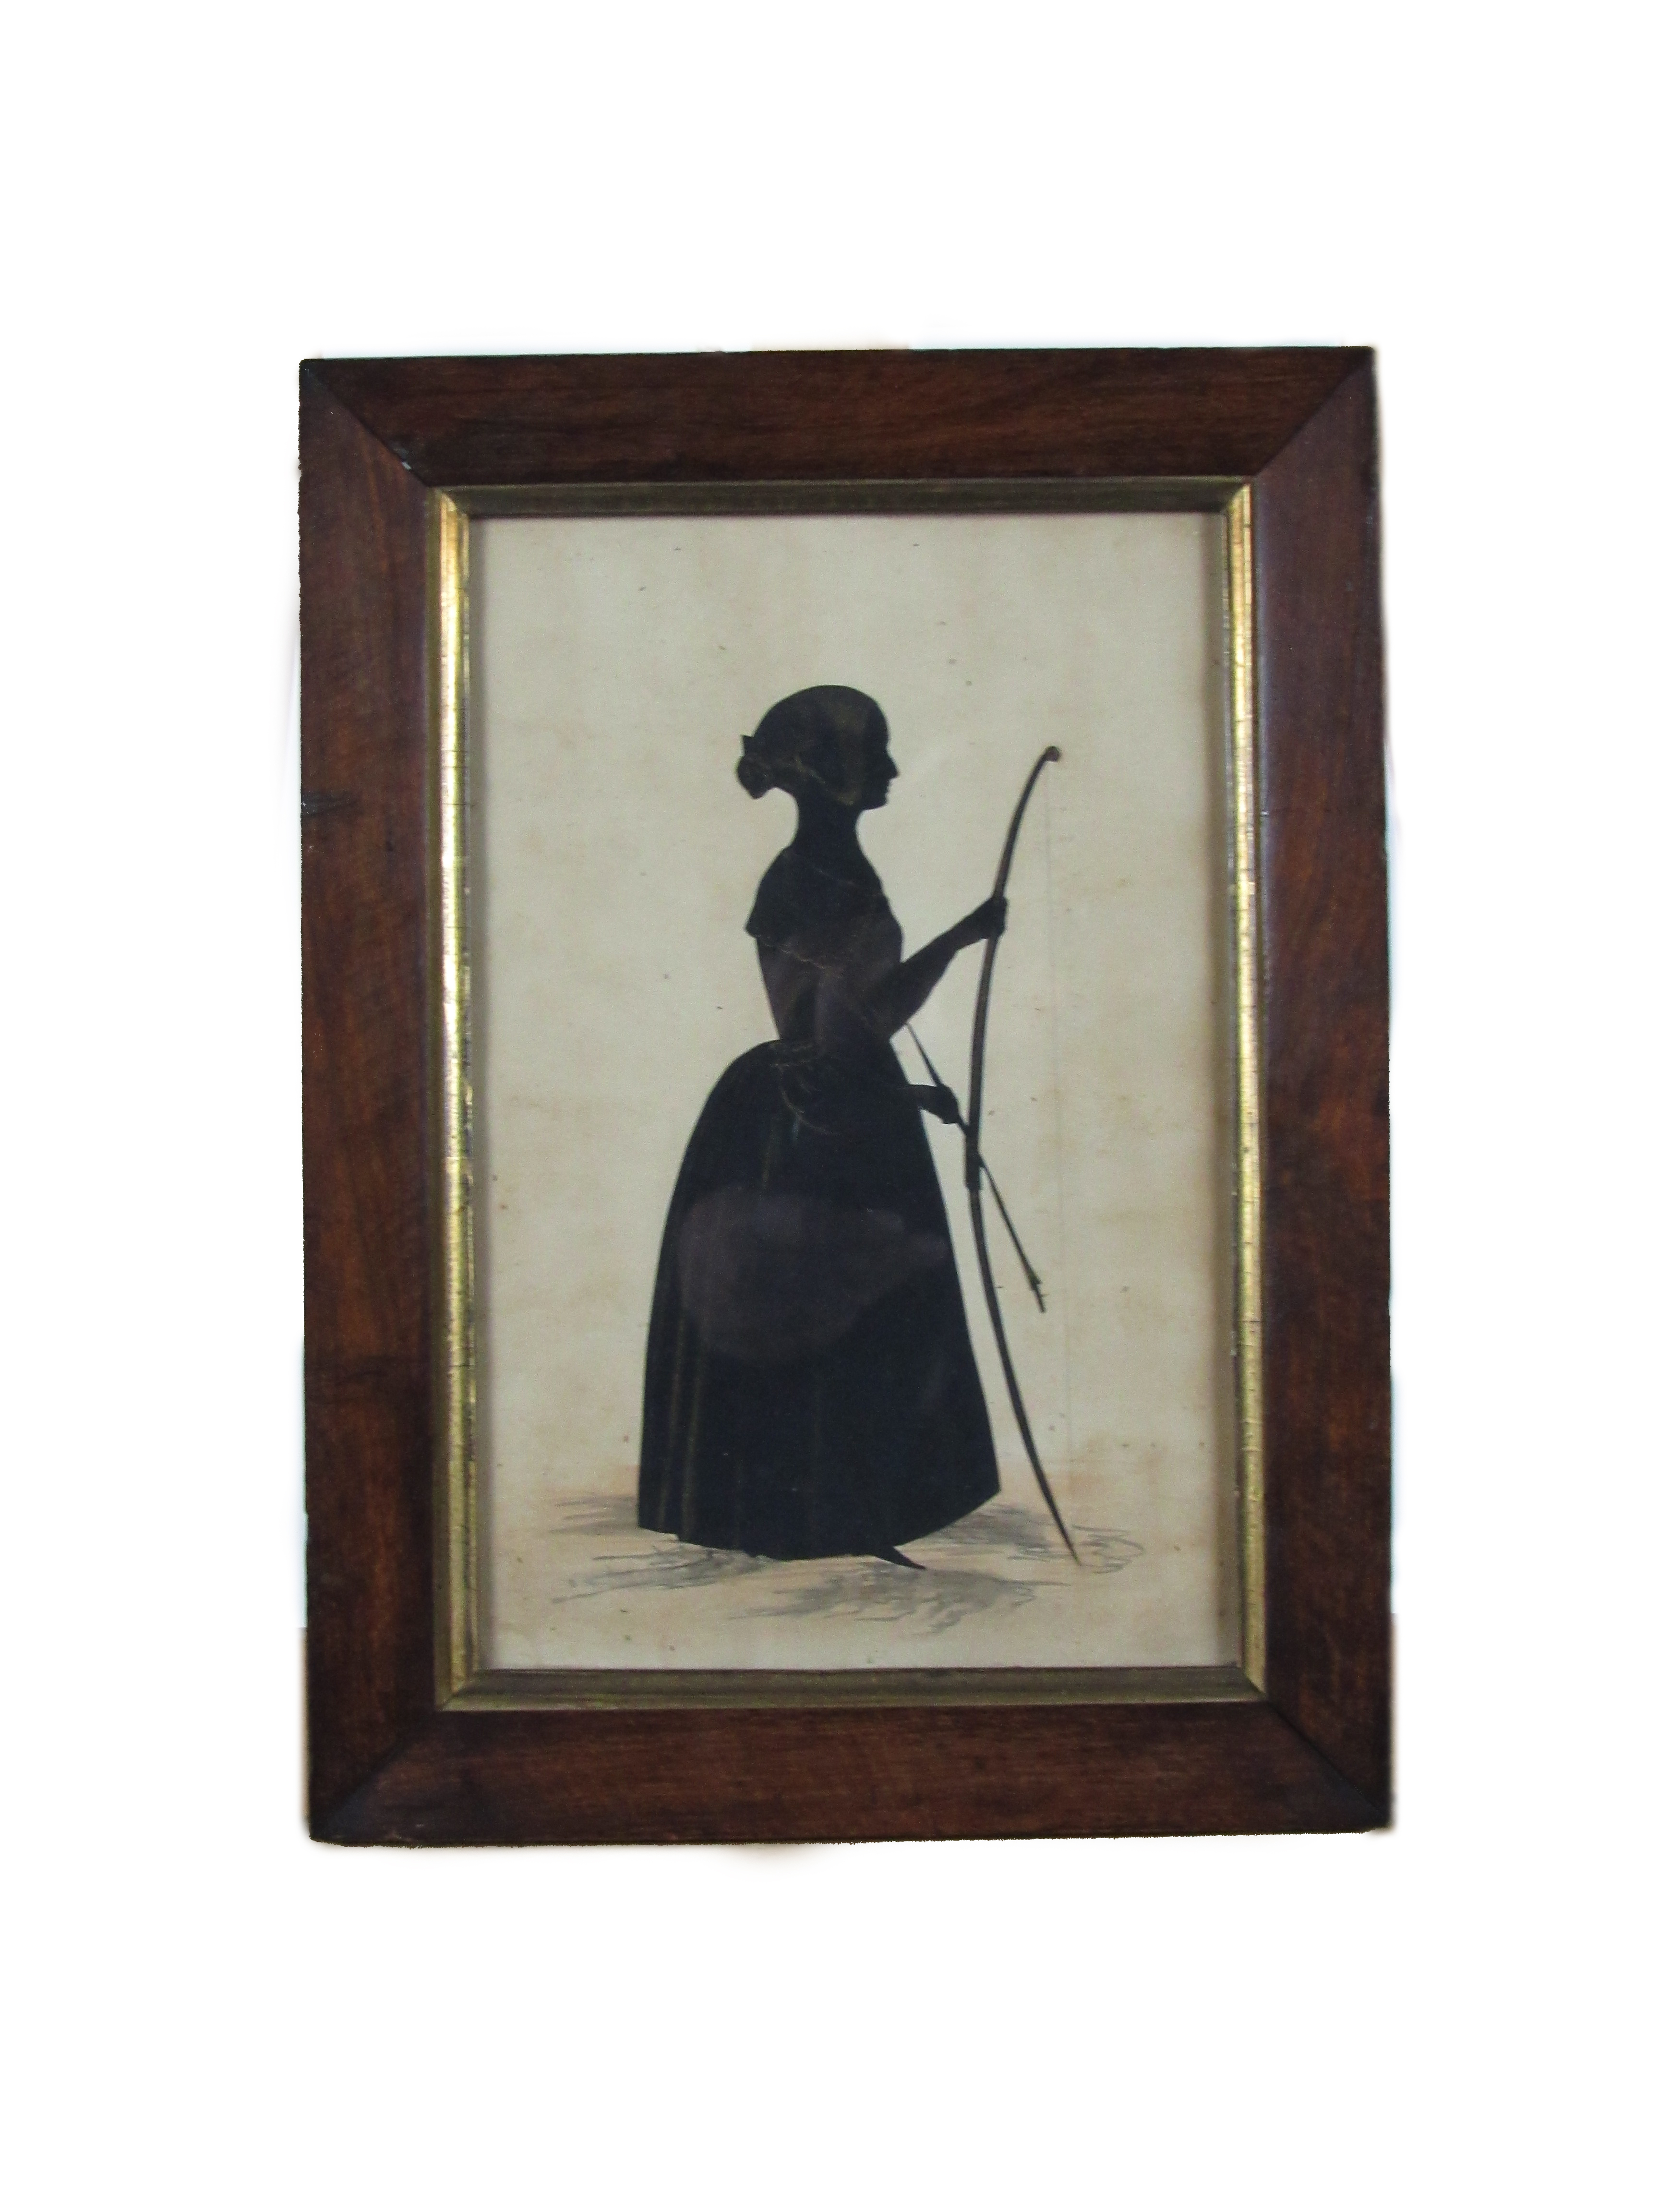 Attributed to Augustin Edouart (1784-1861) Silhouettes: [The Gerrard Family of Liscarton, Co. Meath] - Image 3 of 7